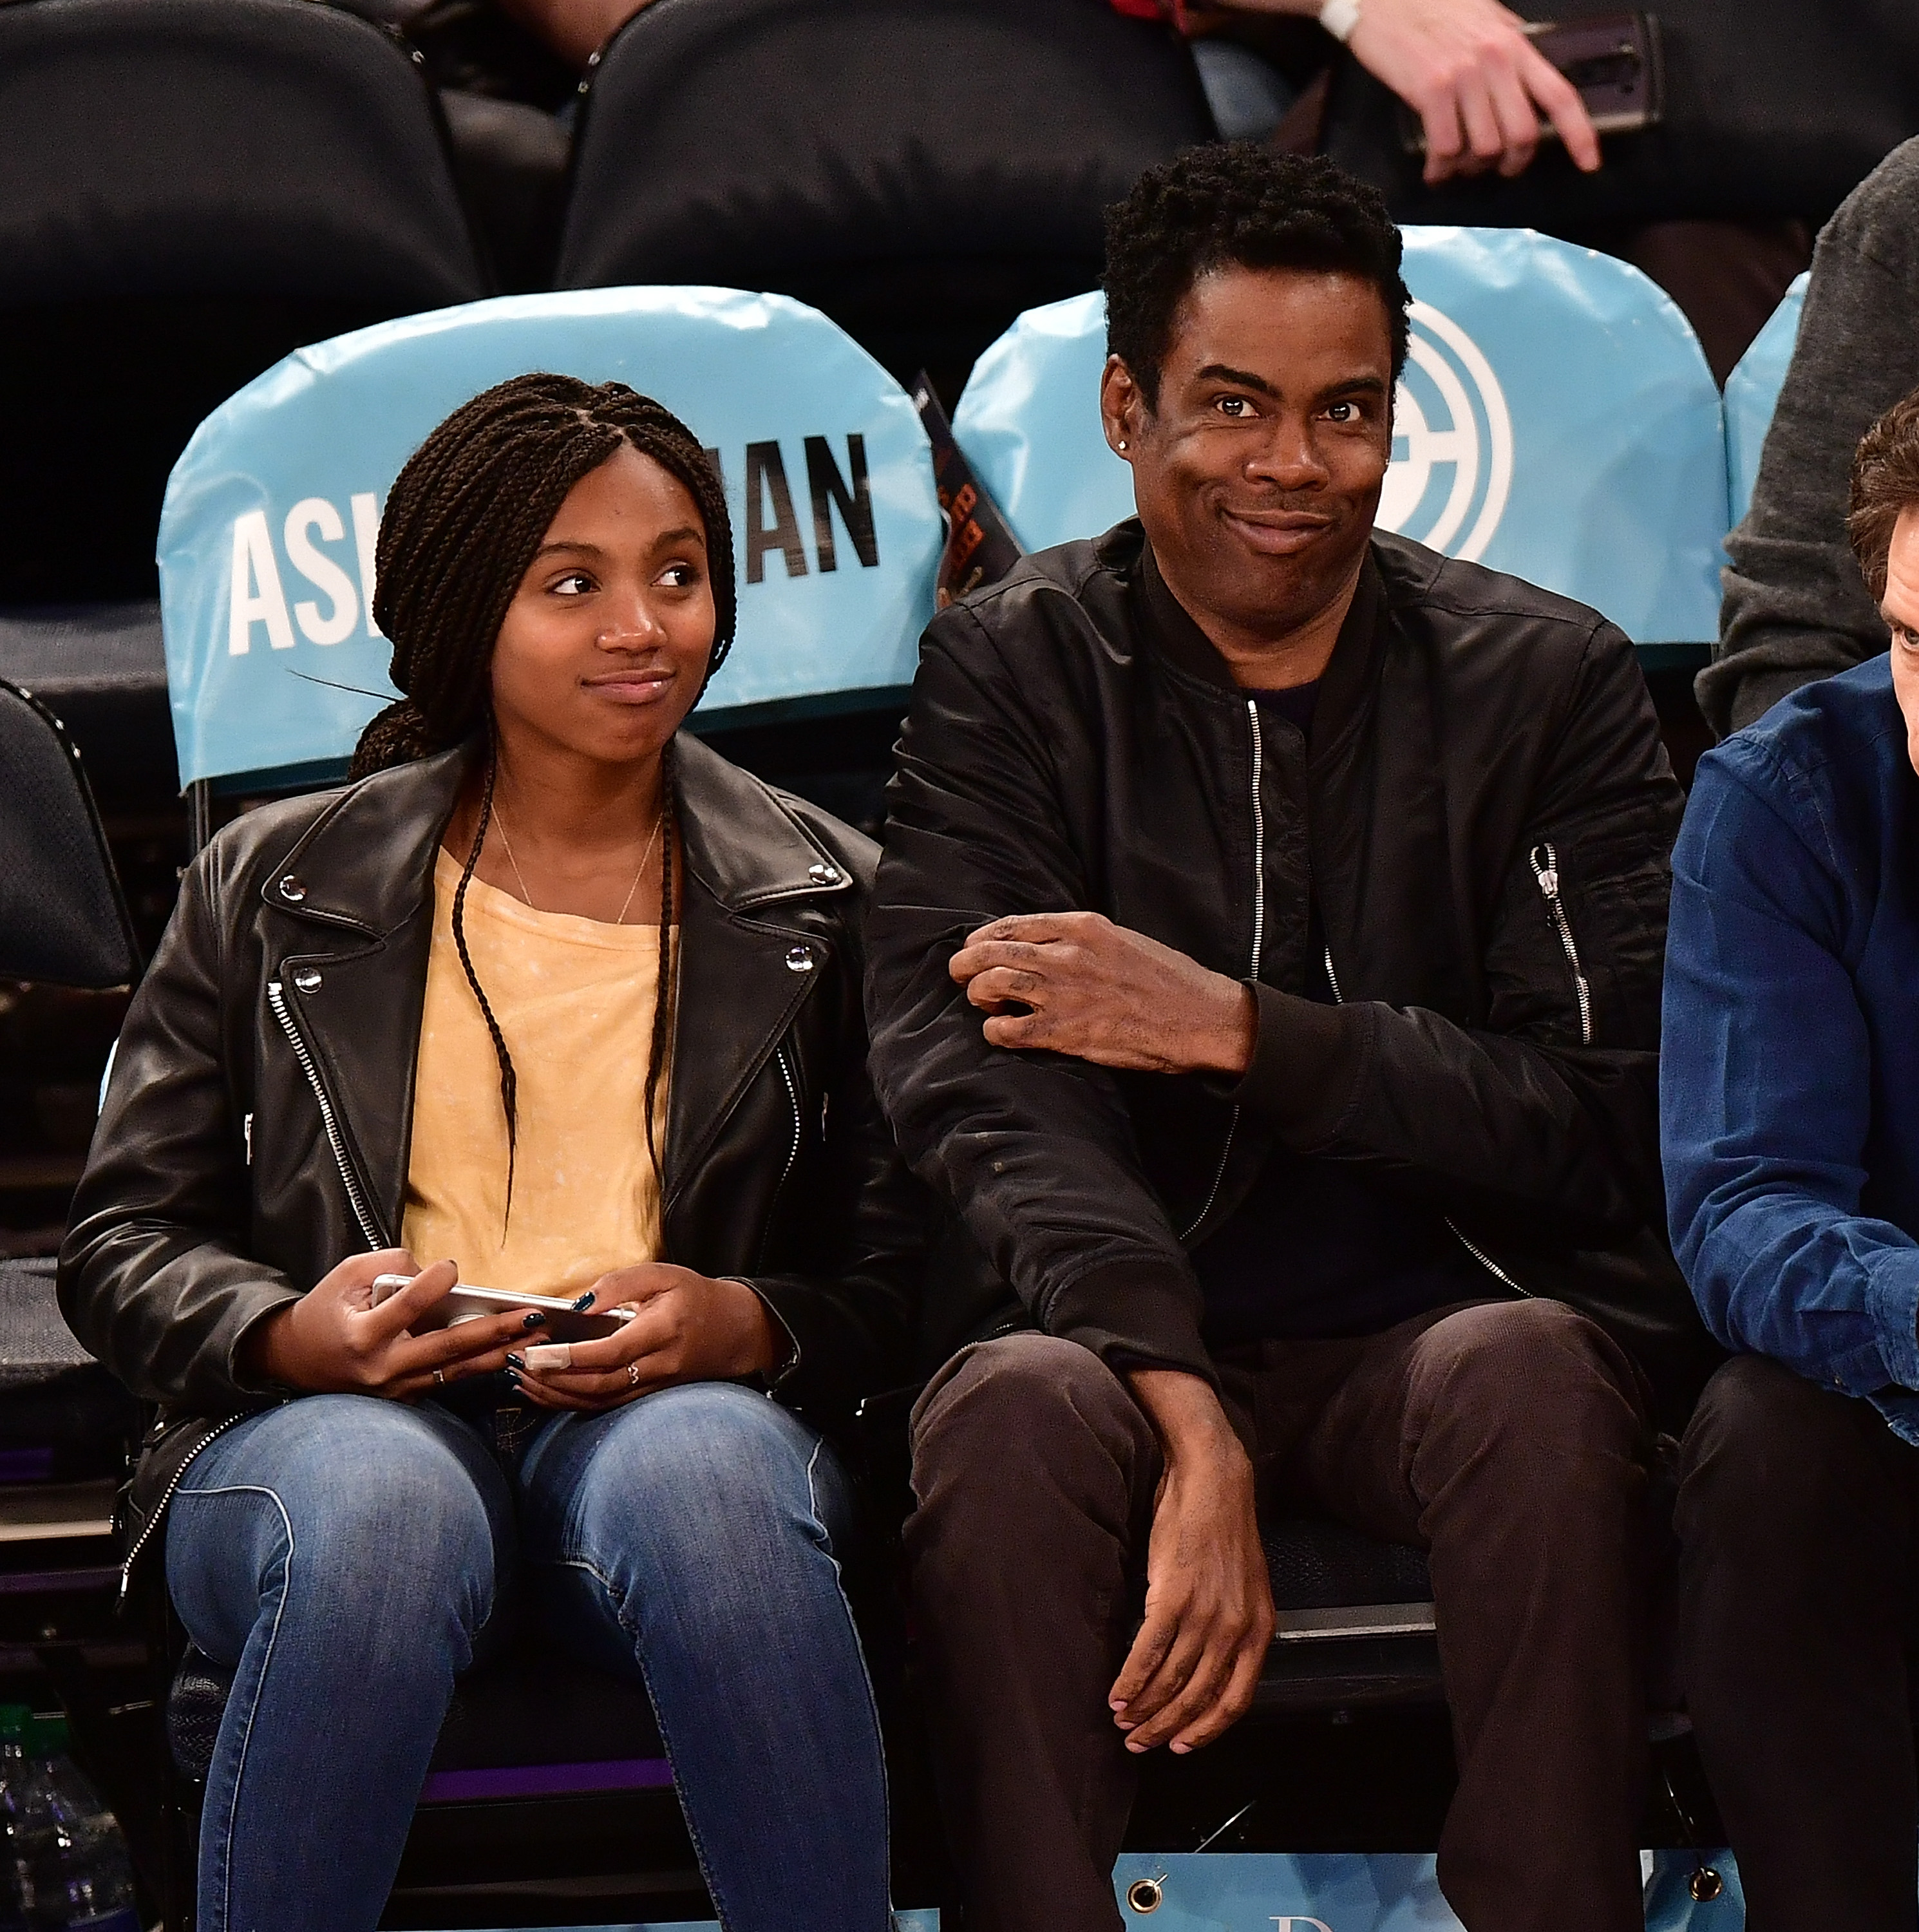 Lola Simone Rock and Chris Rock are pictured at the Brooklyn Nets Vs. New York Knicks game at Madison Square Garden on March 16, 2017, in New York City | Source: Getty Images